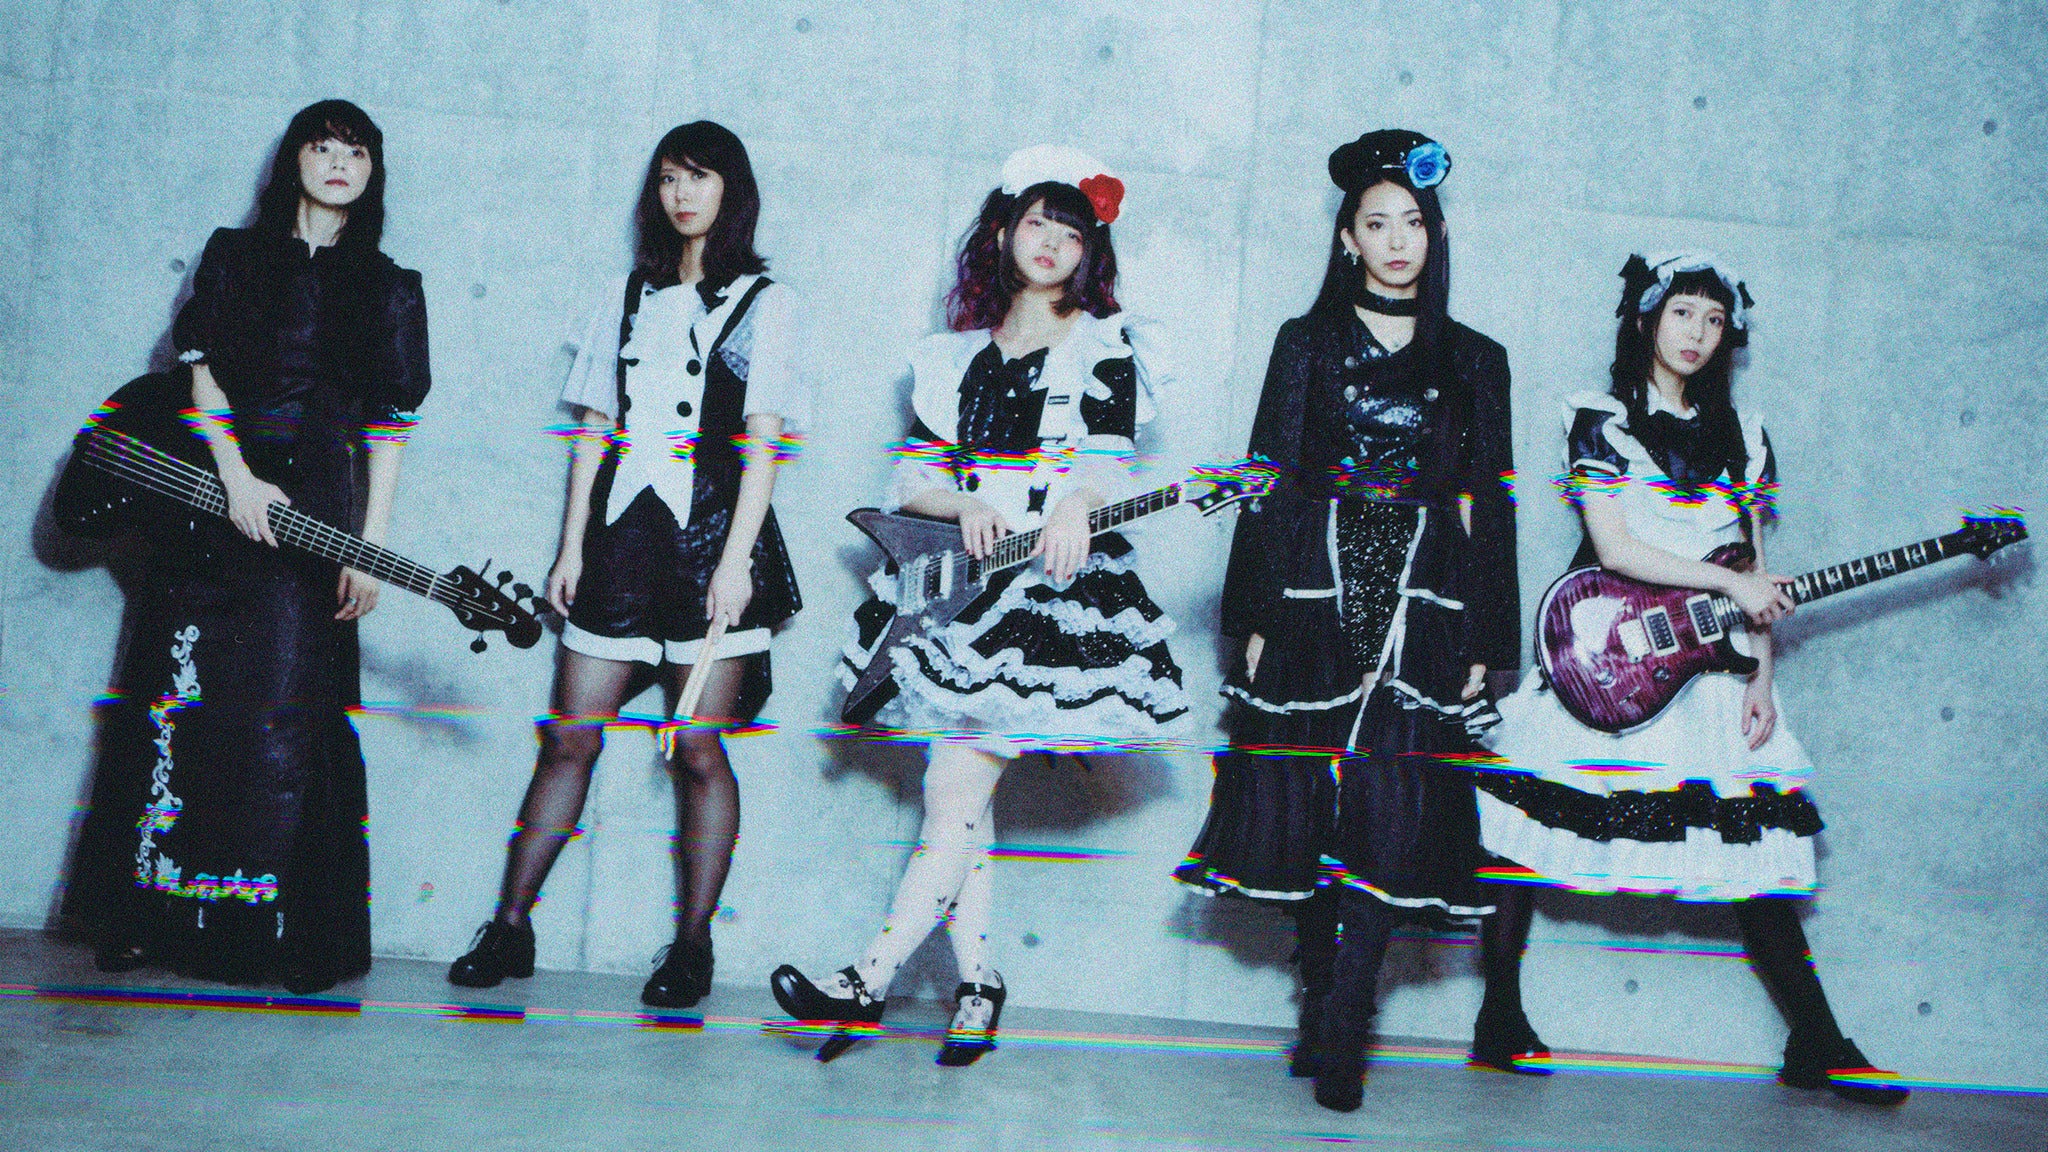 Band-Maid 10th Anniversary Tour pre-sale password for show tickets in Spokane, WA (Bing Crosby Theater)